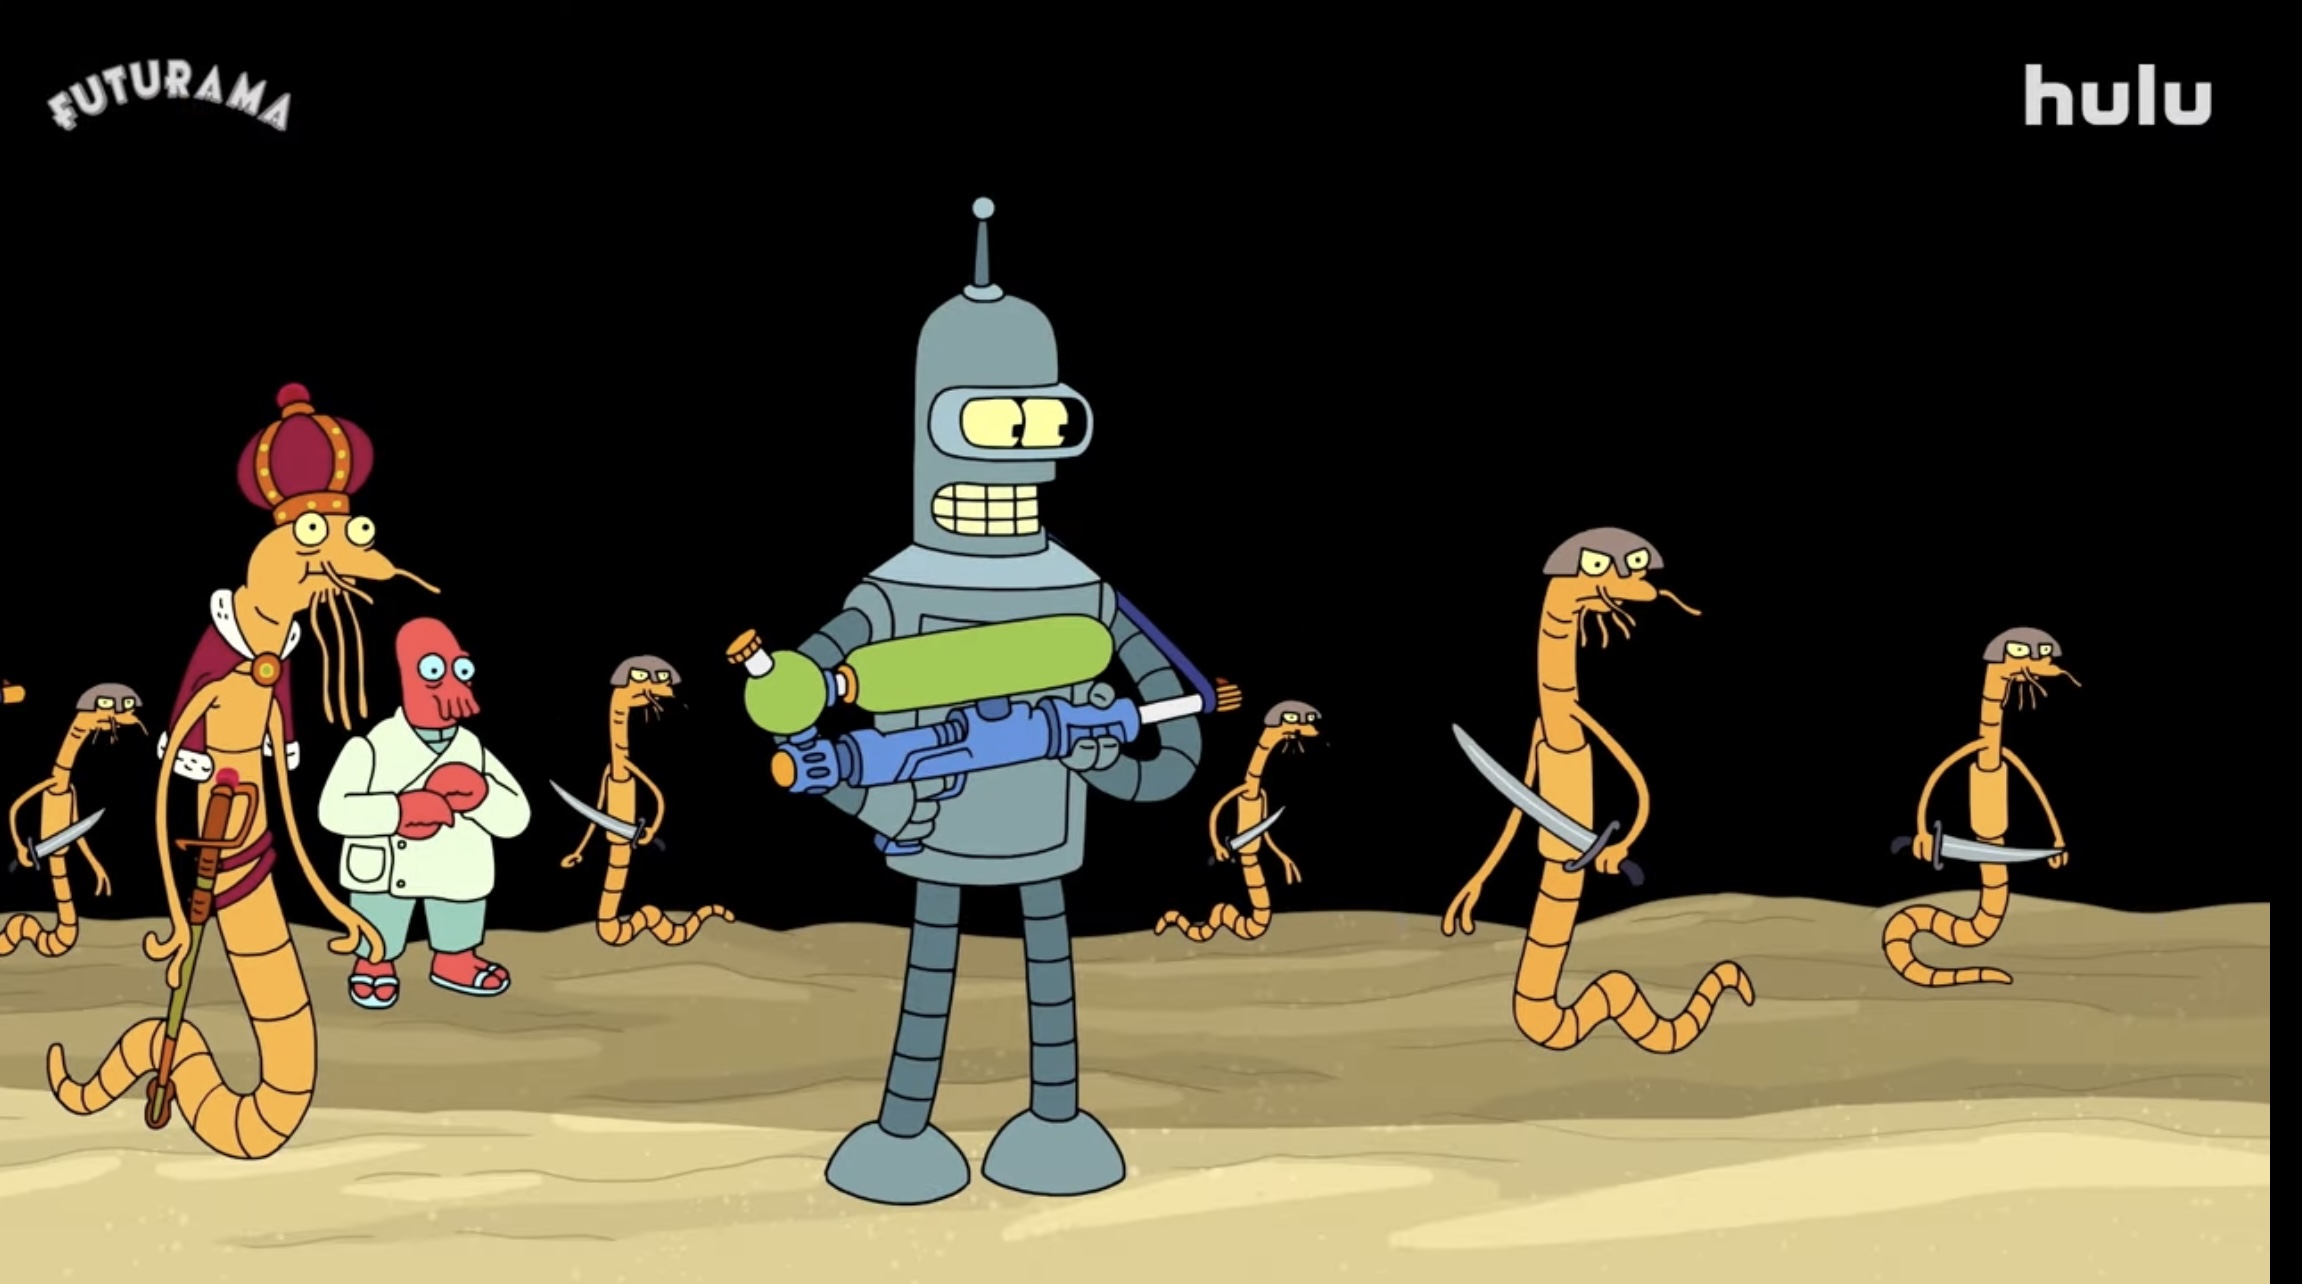 Uh oh, the brain worms are back on Futurama! Fry is about to become a genius again!